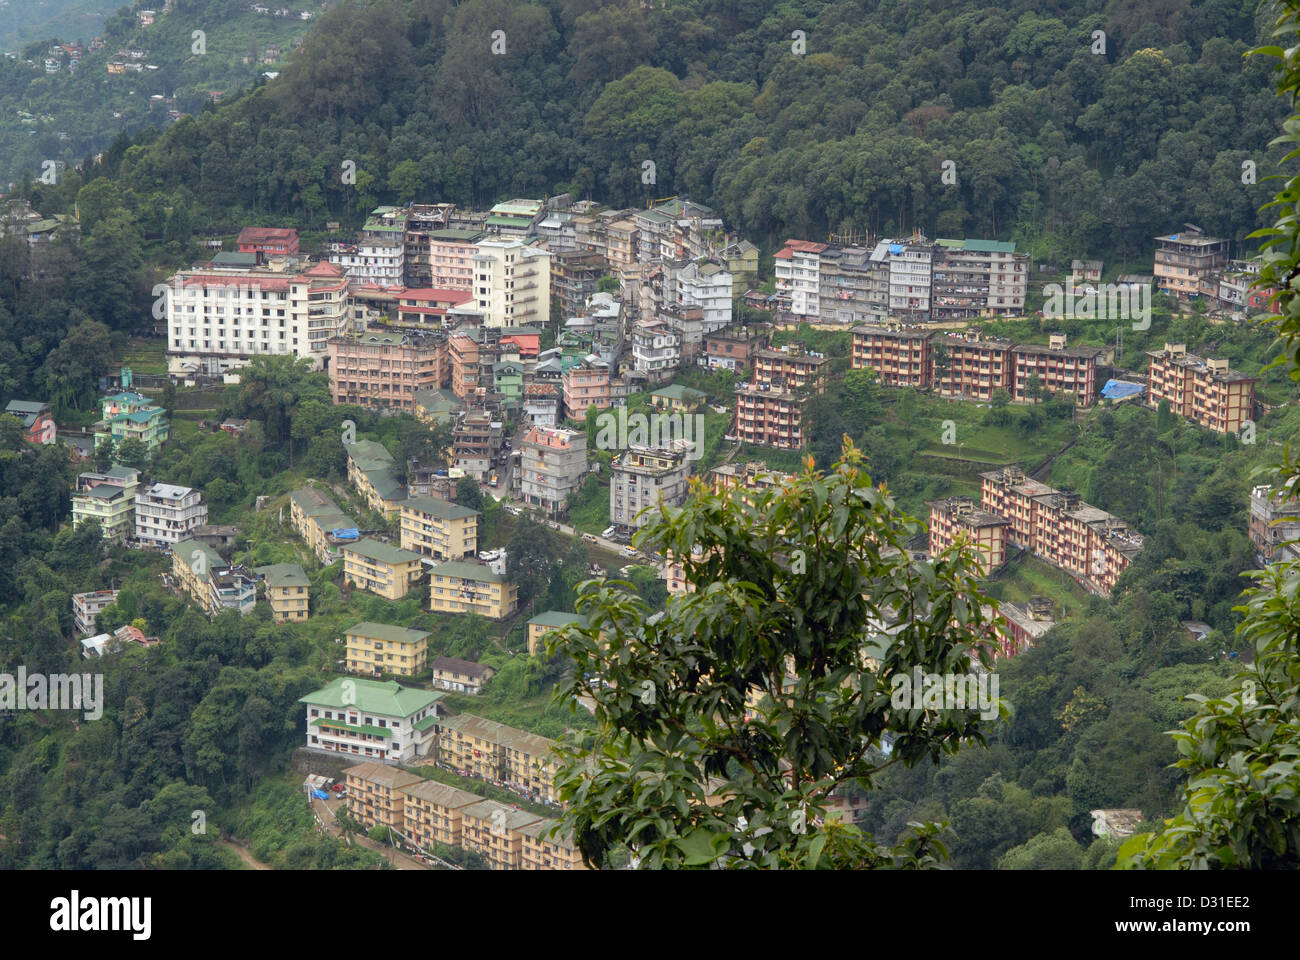 Closer-View of one of the hills at Gangtok (Sikkim). Showing small houses on the slopes. Stock Photo